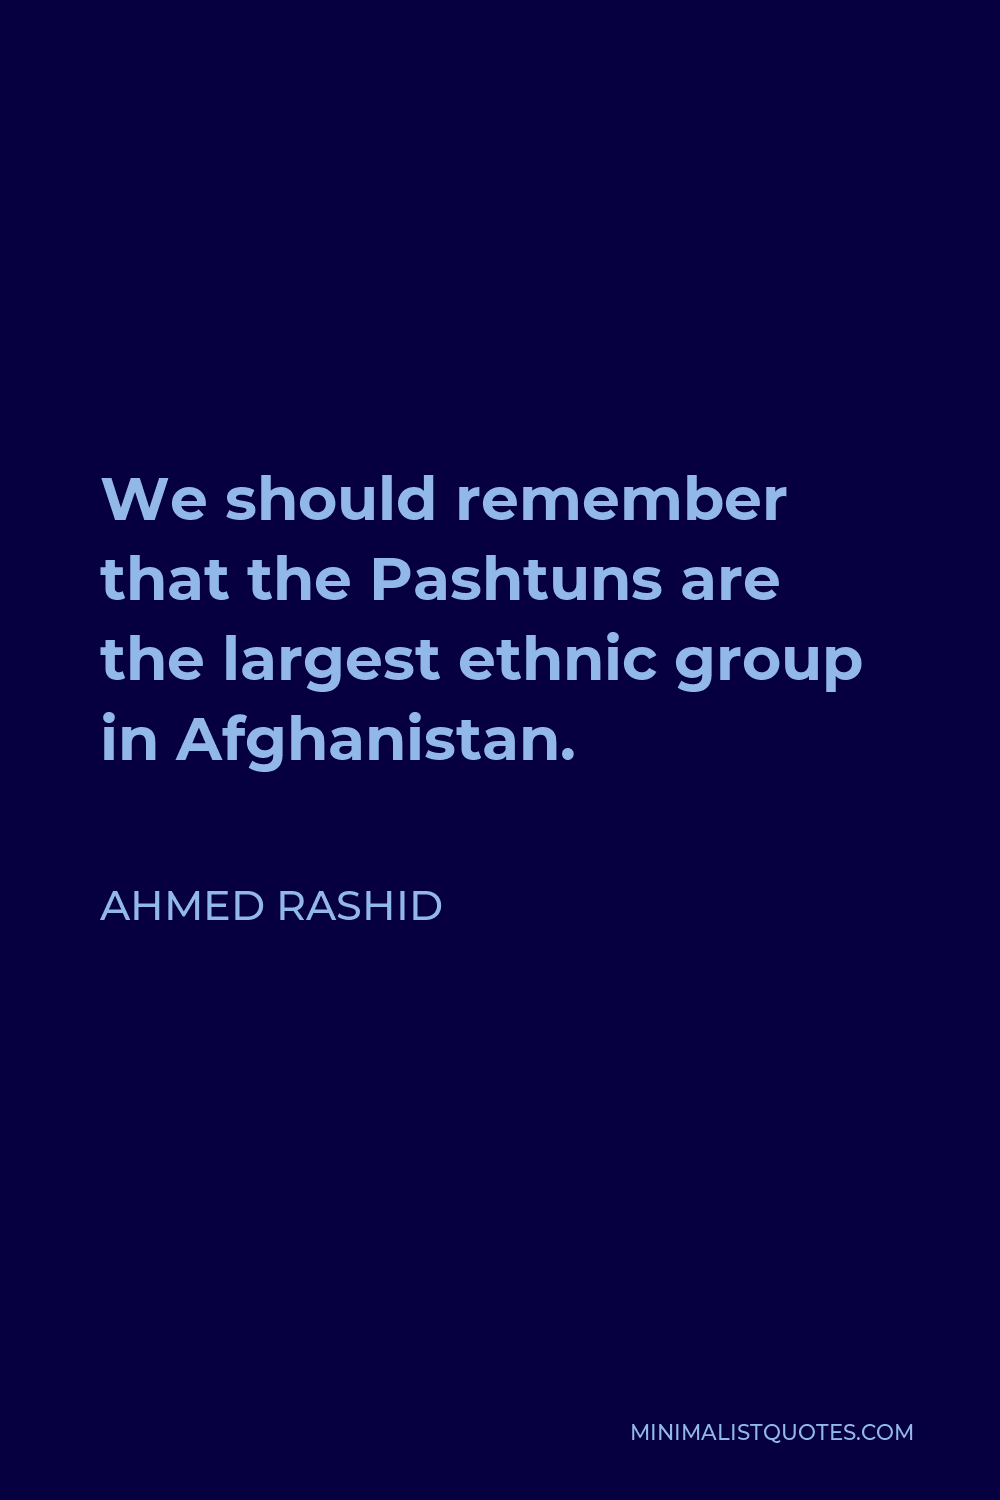 Ahmed Rashid Quote - We should remember that the Pashtuns are the largest ethnic group in Afghanistan.